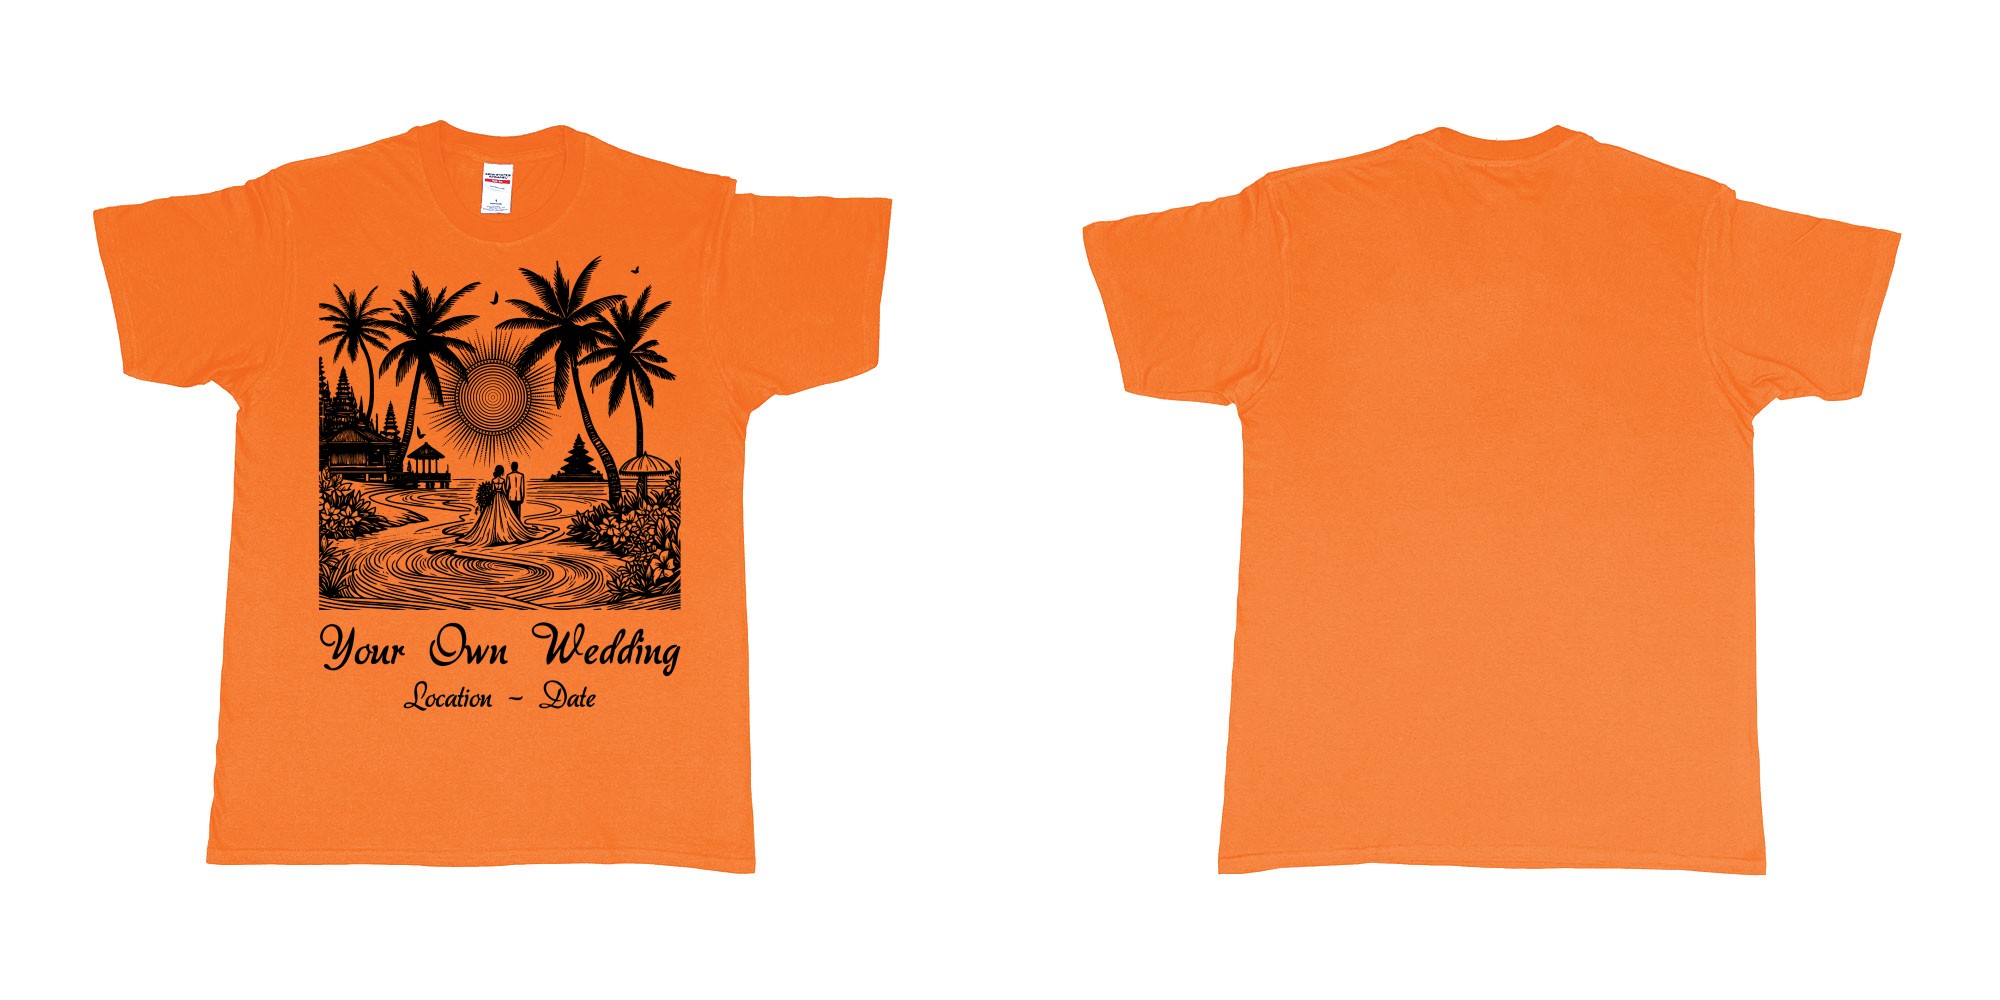 Custom tshirt design wedding couple drawing bali beach sea sunset custom printing souvenir gift in fabric color orange choice your own text made in Bali by The Pirate Way